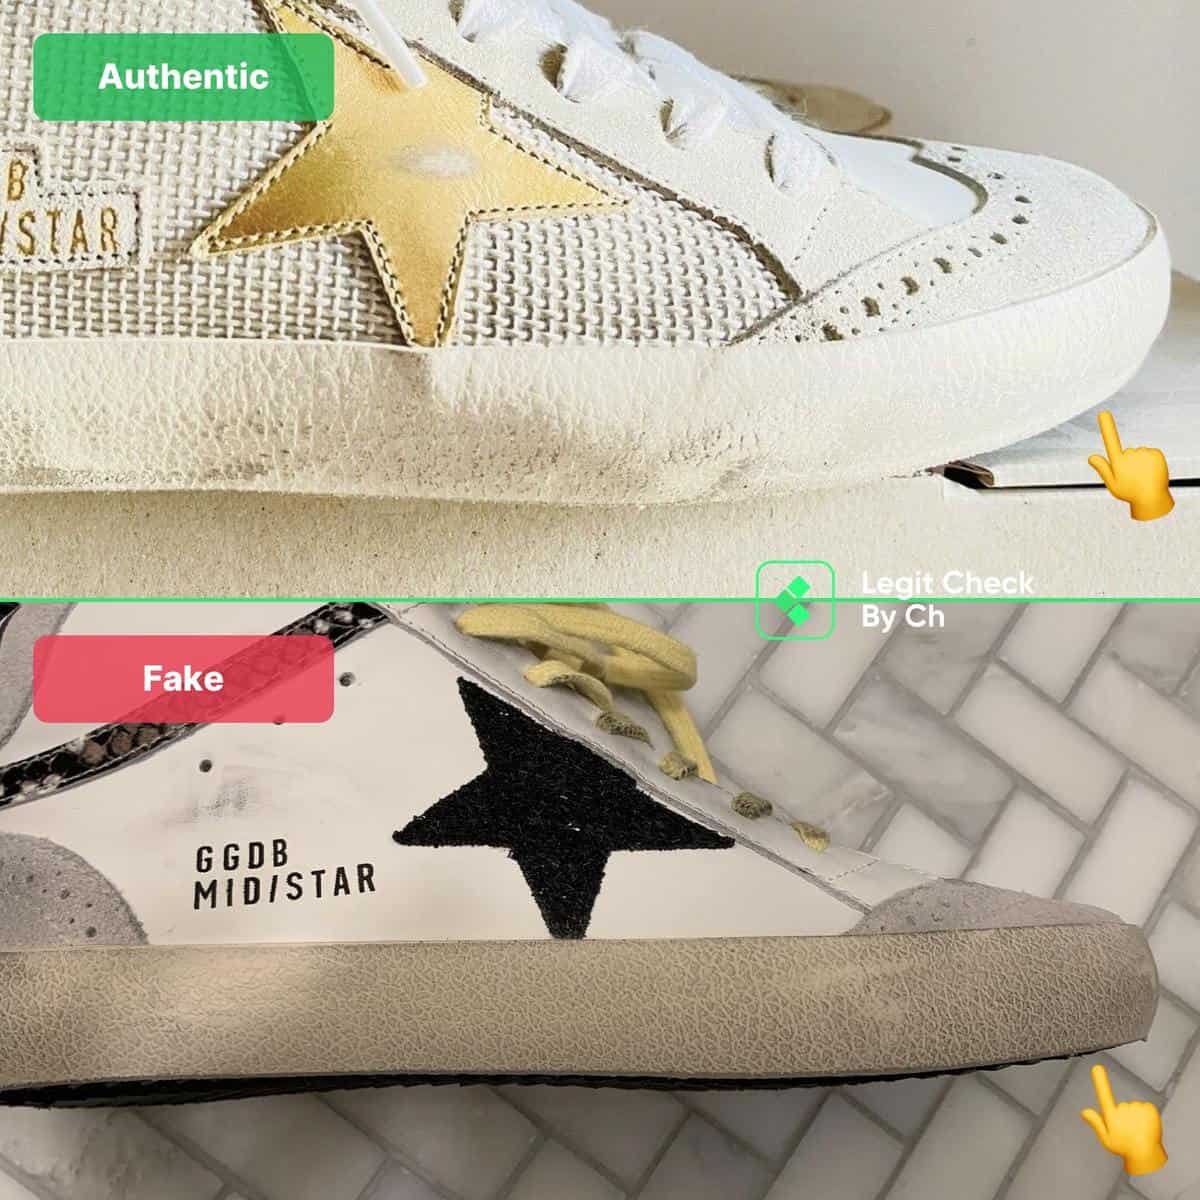 Golden Goose Mid Star Fake Vs Real - How To Spot Fake Star Sneakers - Legit Check By Ch